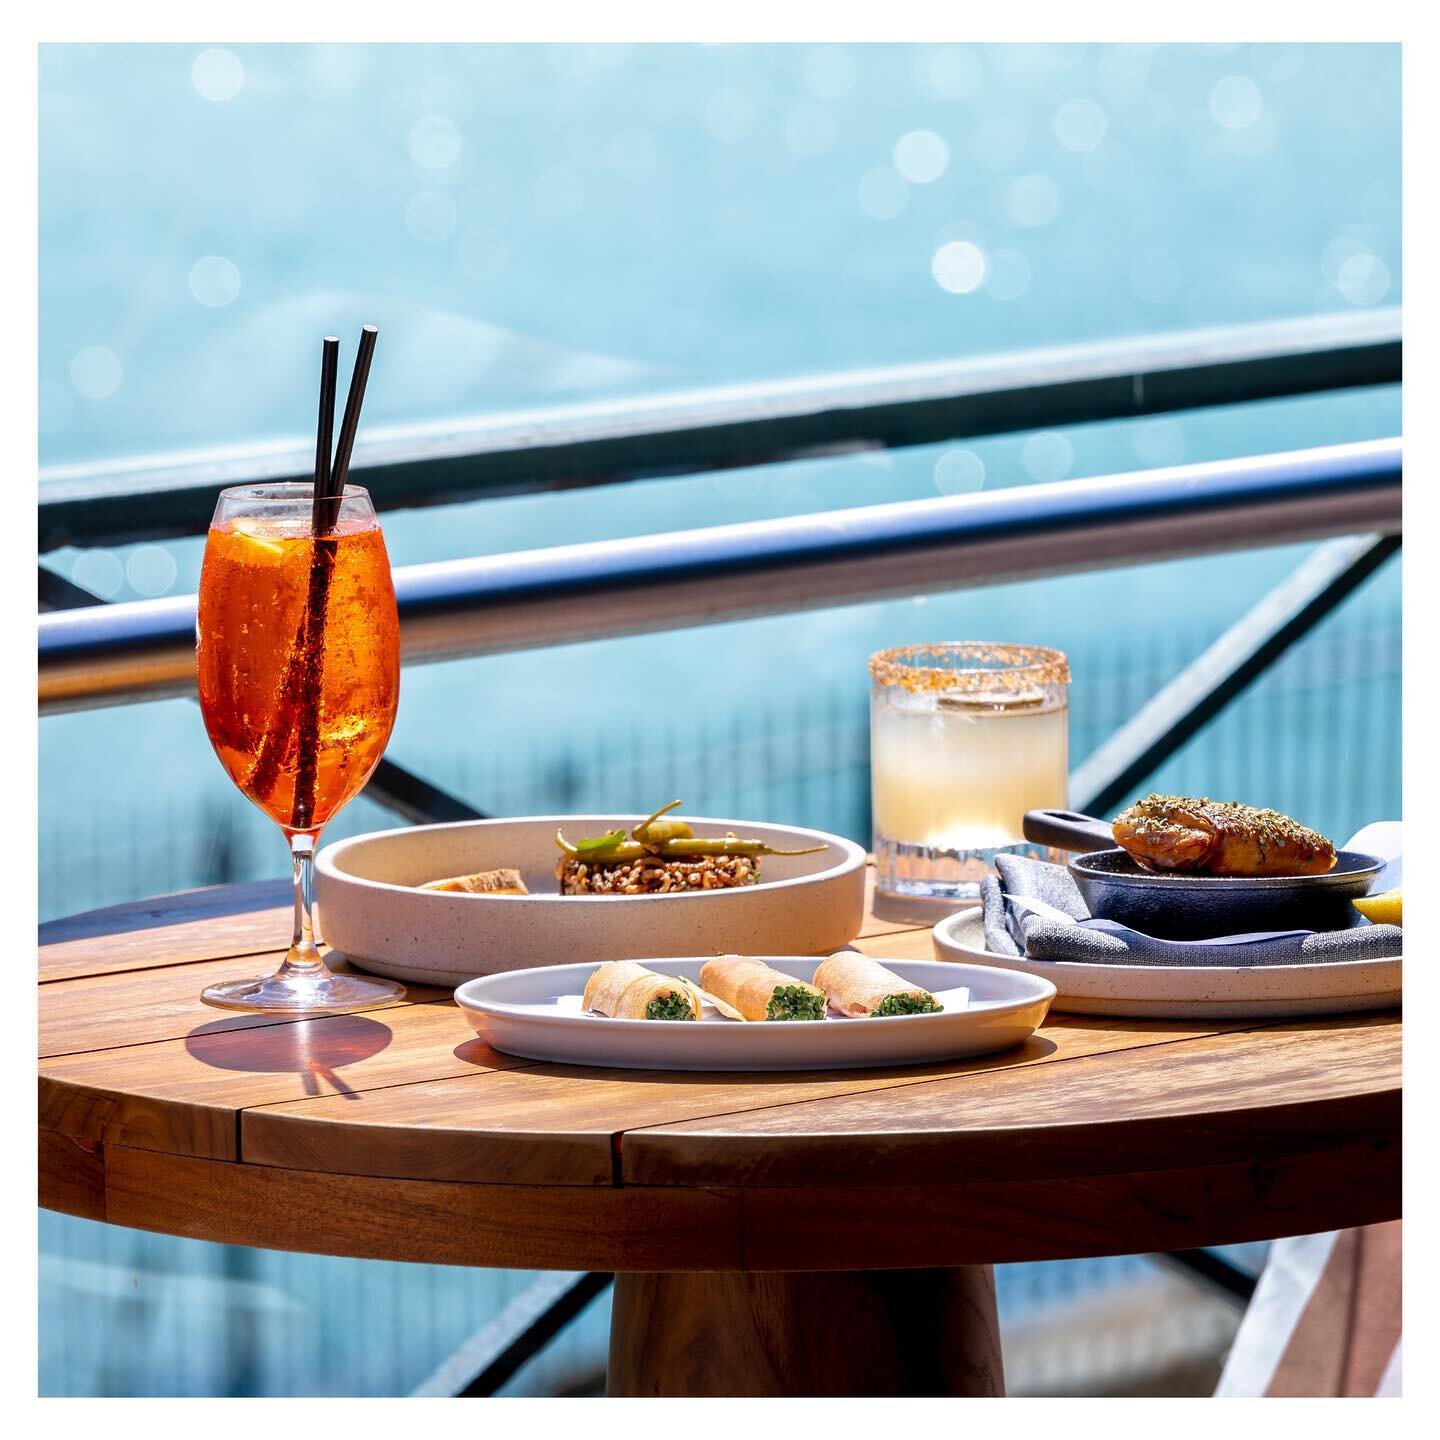 MAKING WAVES: It's all about spicy margs and edible brick pastry cigars on the sunny deck overlooking the beach and harbour at the new-look Ripples Chowder Bay in Sydney's Mosman. 🍸🏖️

Squirrelled away in Sydney Harbour National Park by beautiful l